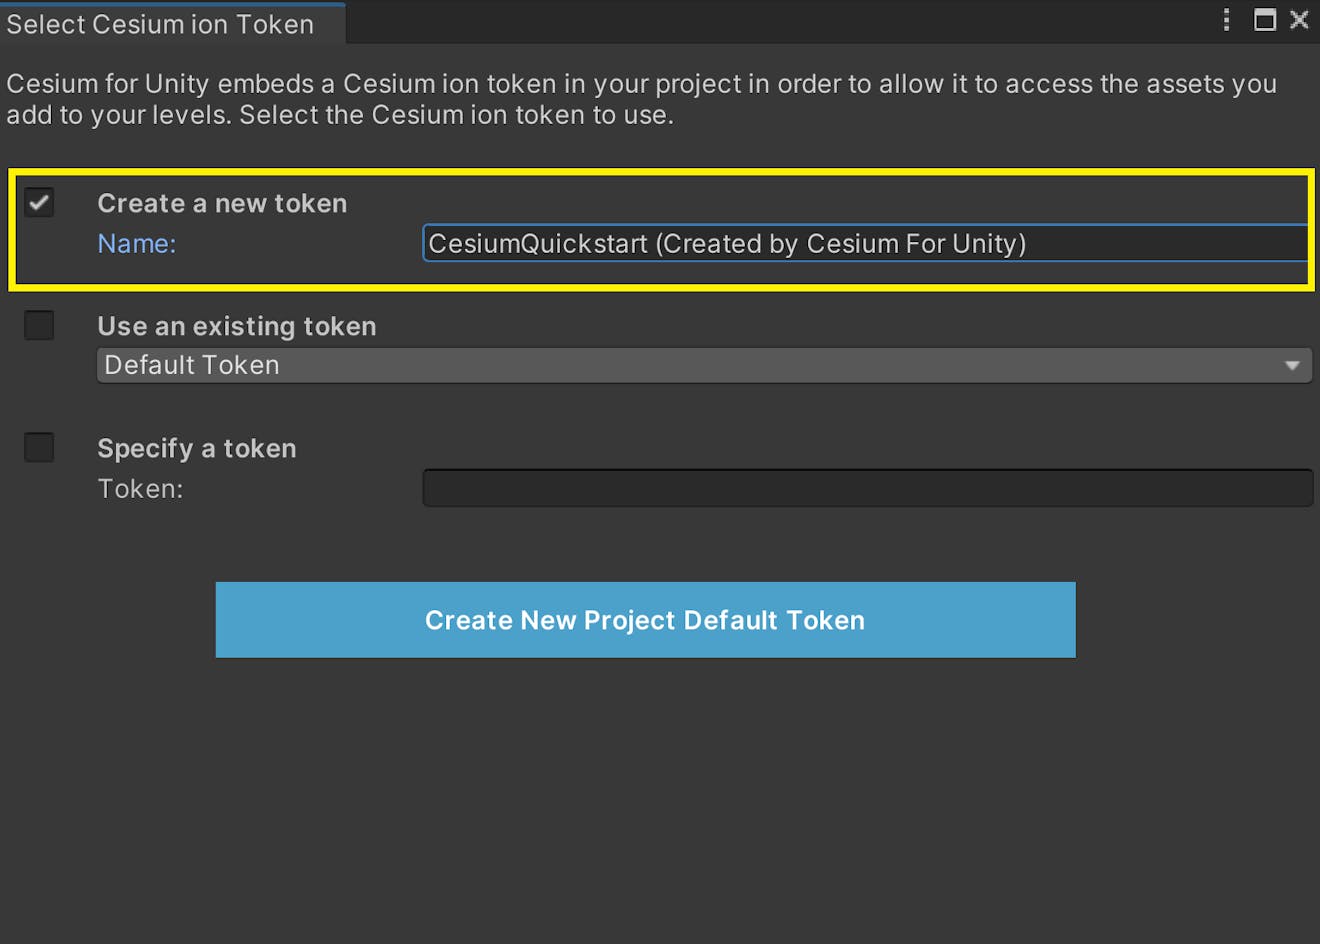 A new window will appear to configure the token. Select the Create a new token option, and rename the token if you wish. Then, press the Create New Project Default Token button.